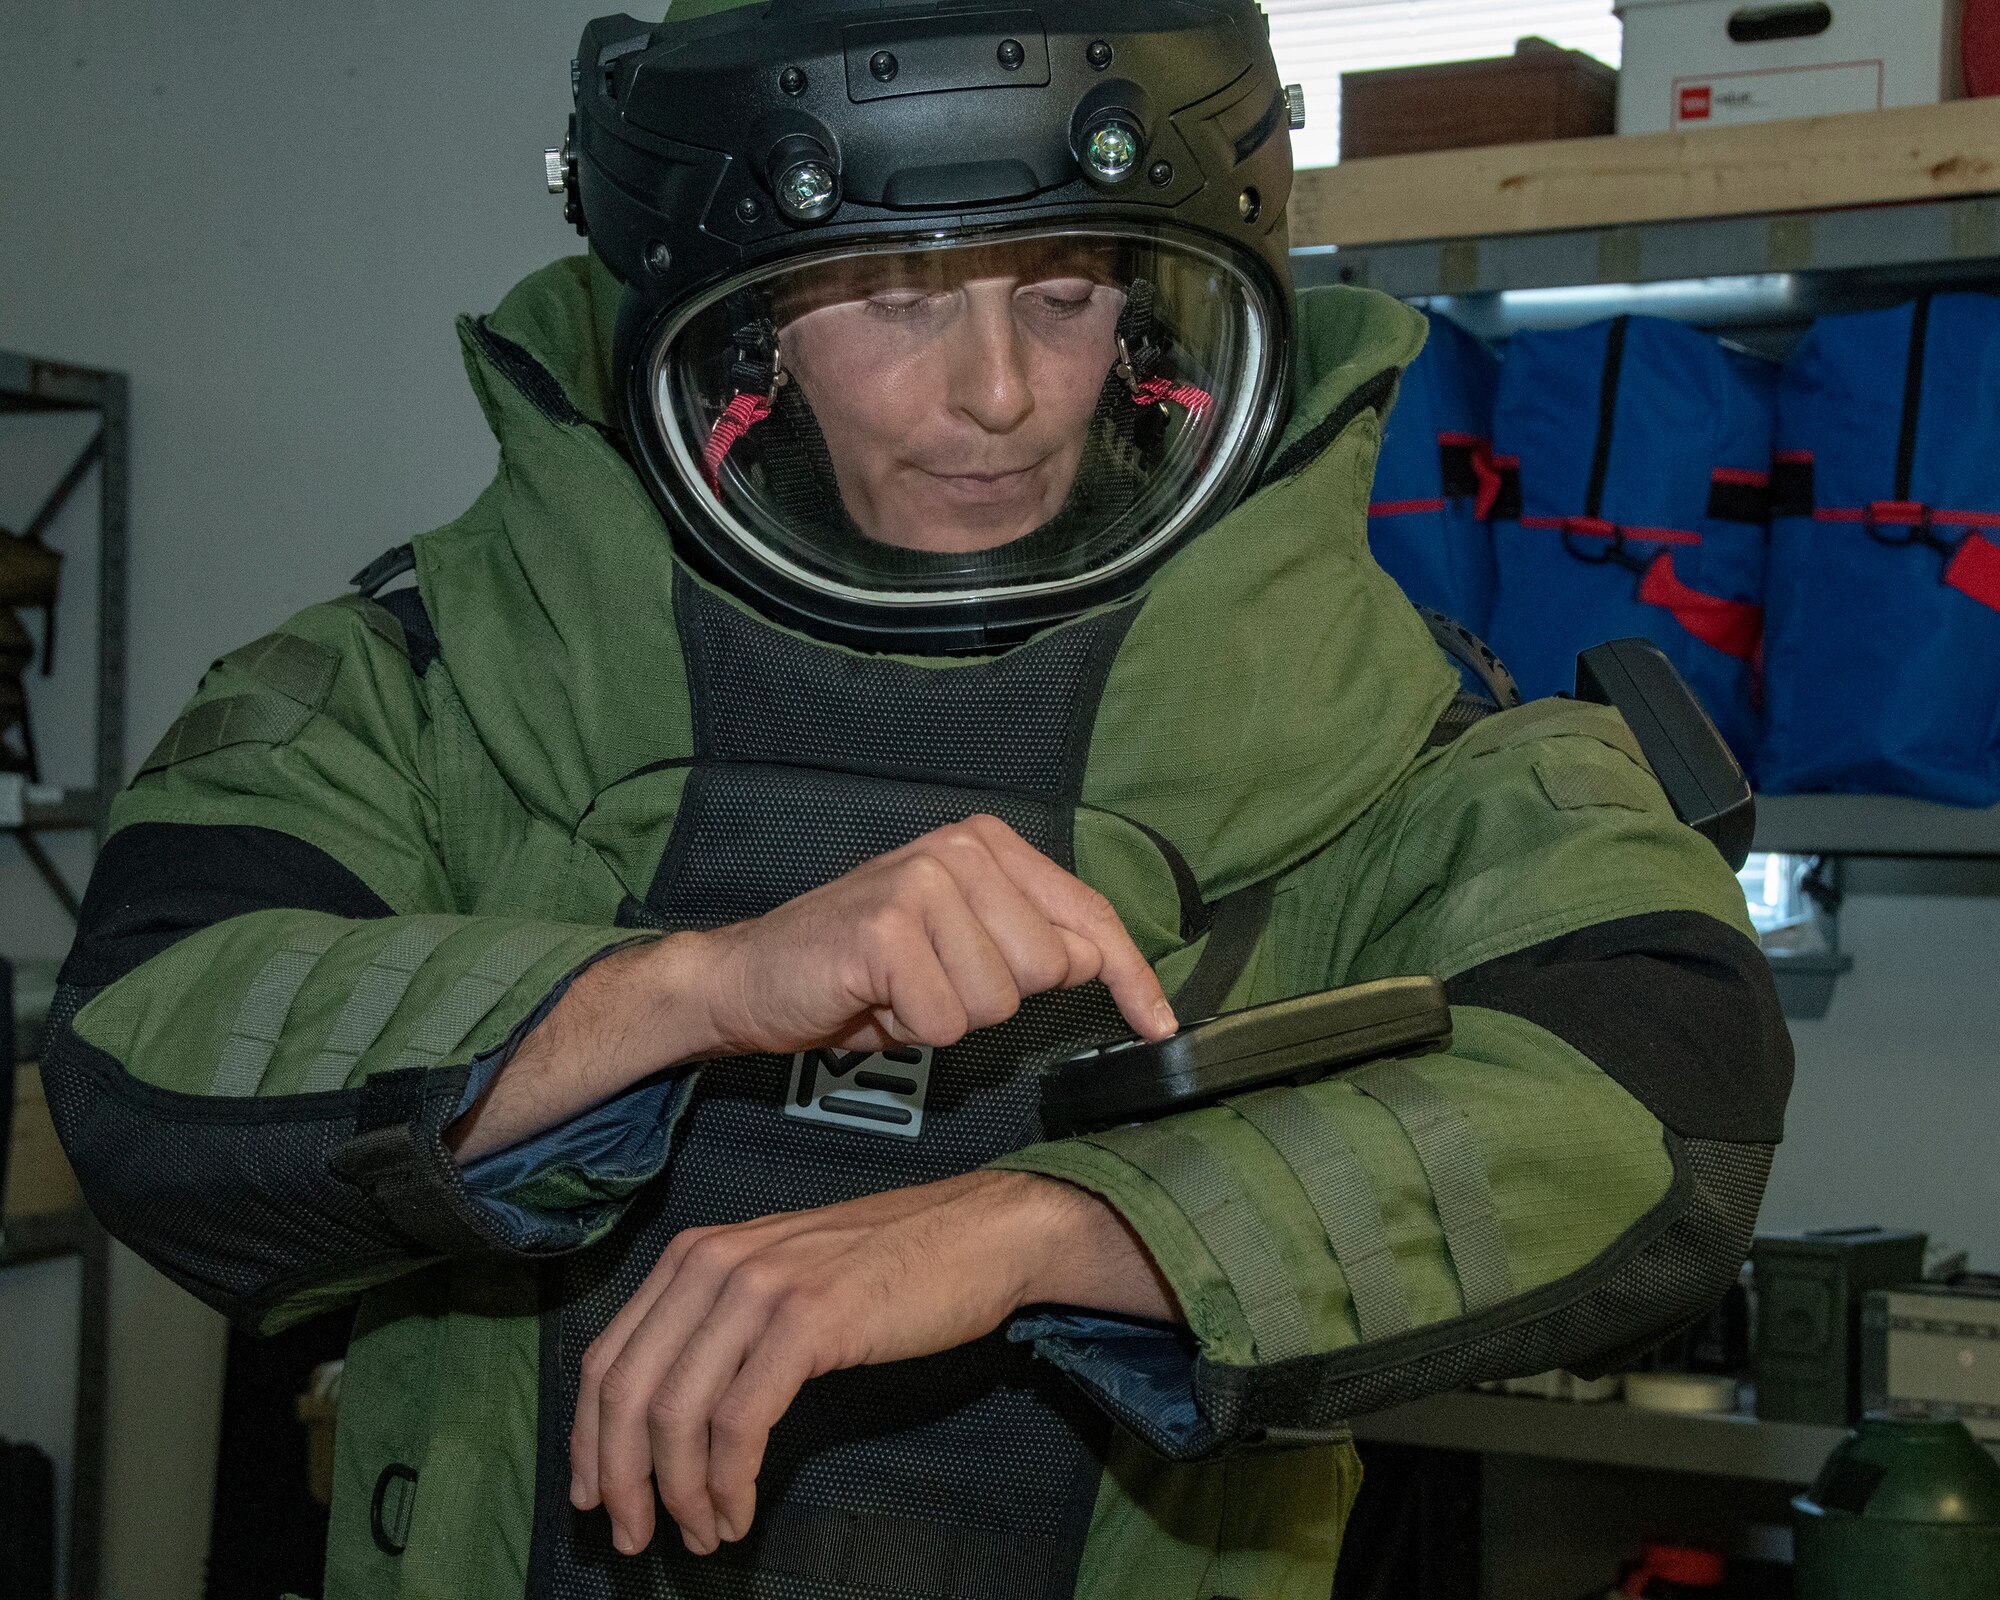 MSgt Mark Jurakovich from the 166th Airlift Wing Explosive Ordinance Disposal Unit, Delaware Air National Guard and the Outstanding Airman of the Year in the category of Senior Noncommissioned officer function tests the EOD bomb suit, Jun 6, 2019. OAY is an ANG command chief program to recognize the best of the best Airman throughout the ANG enterprise. (U.S. Air National Guard photo by Master Sgt. David J. Fenner)